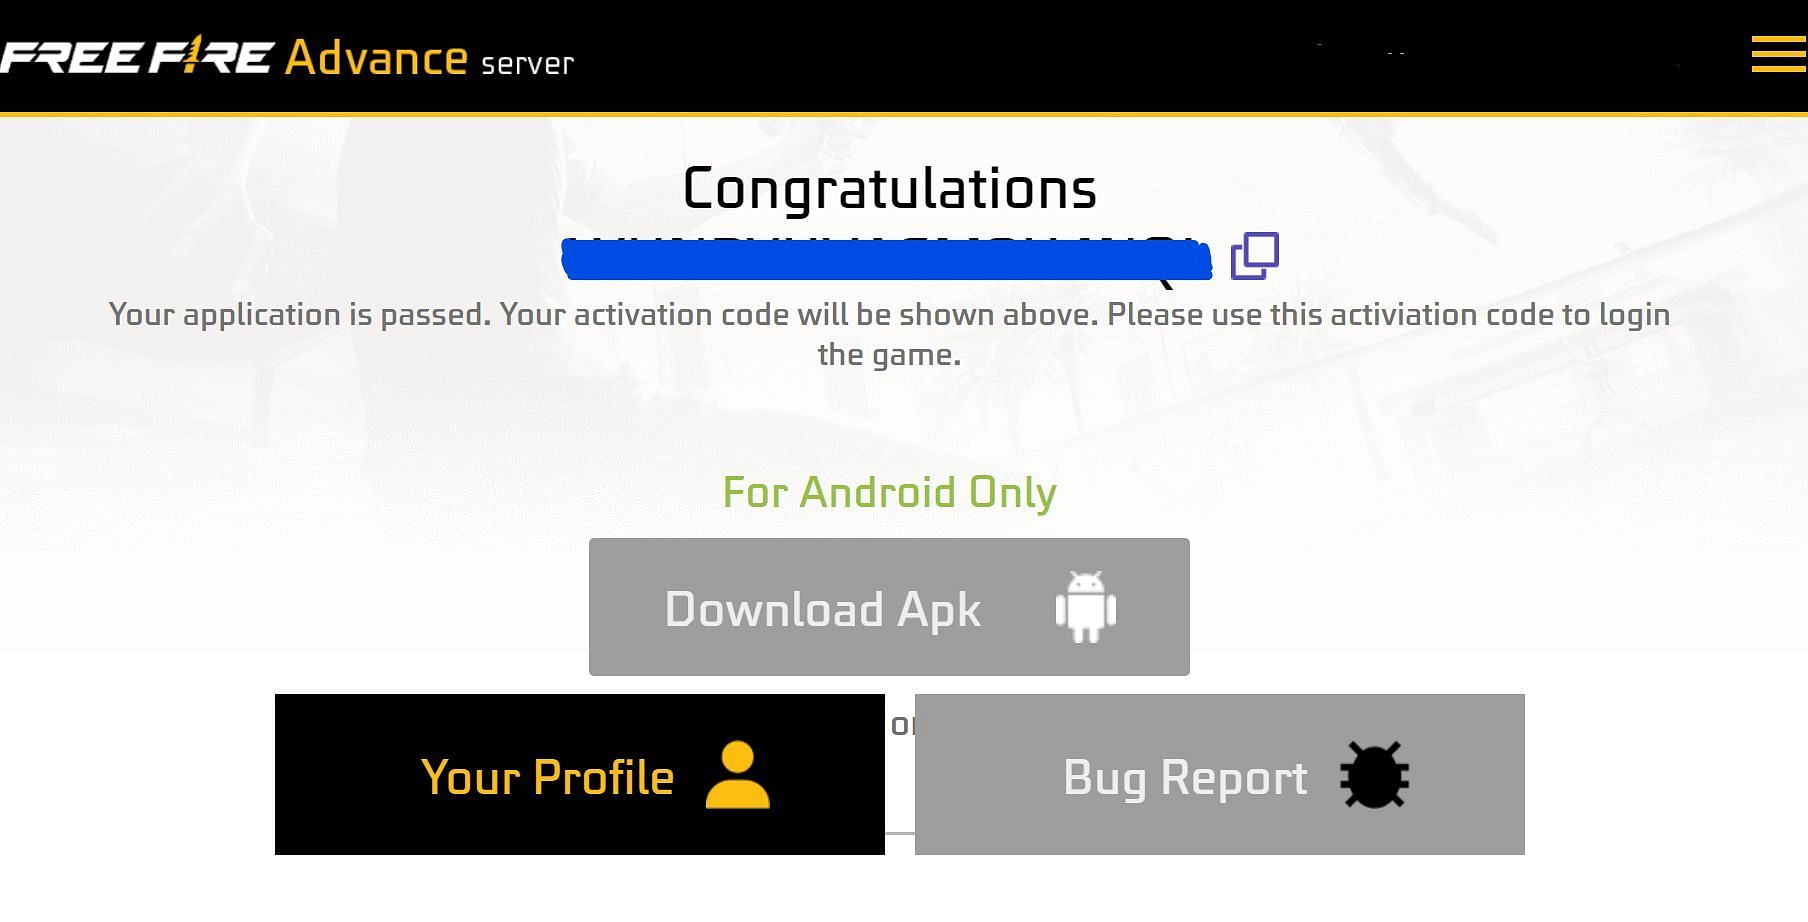 How To Get Activation Code In Freefire Advance ServerAdvance Server Ka  Activation Code Kaise Milega 